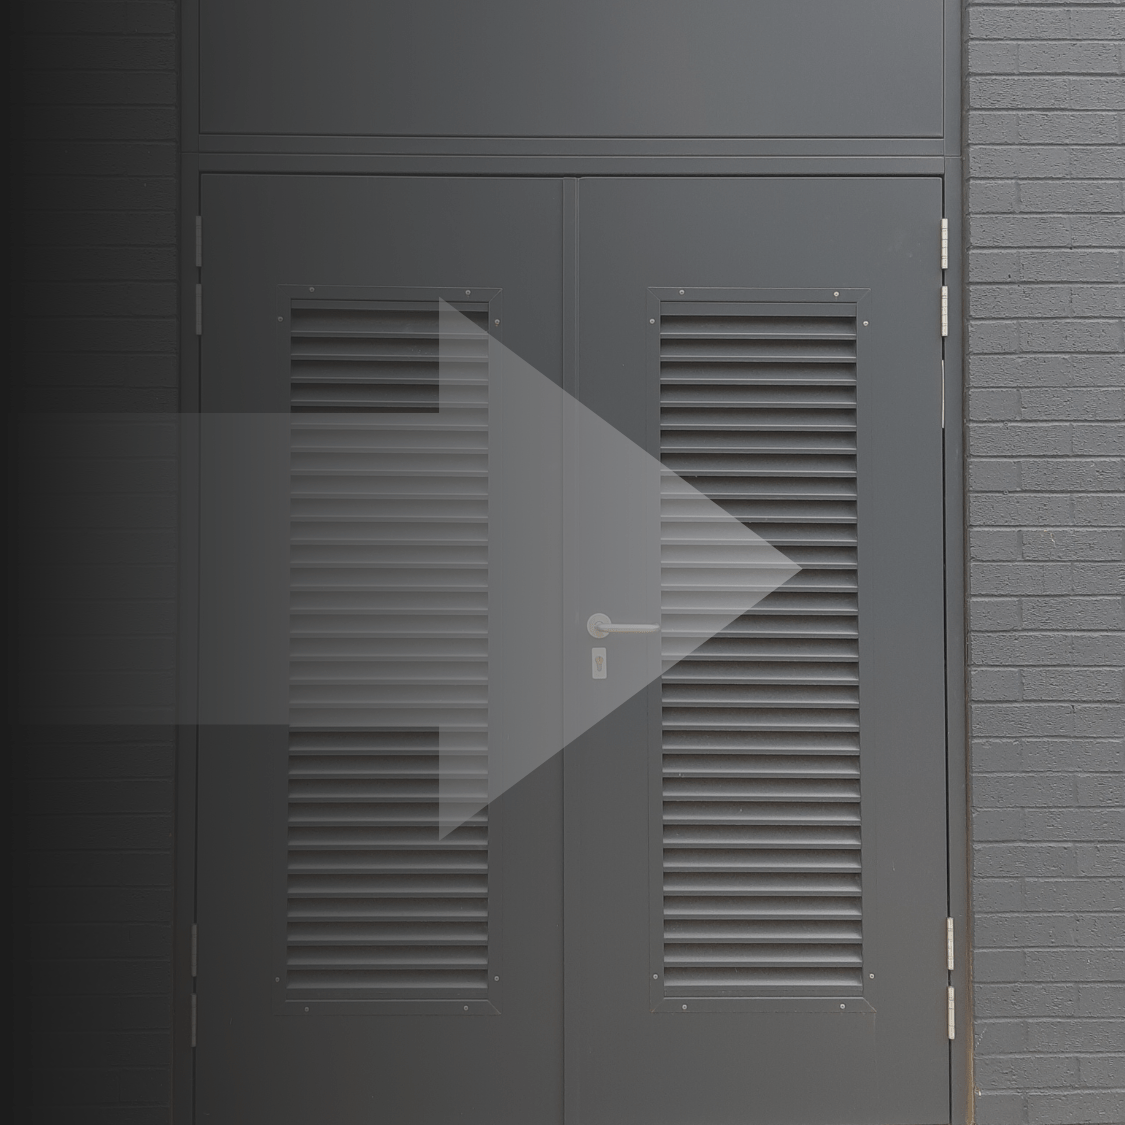 M2M-Express doors with a graphic arrow pointing right in front of it.